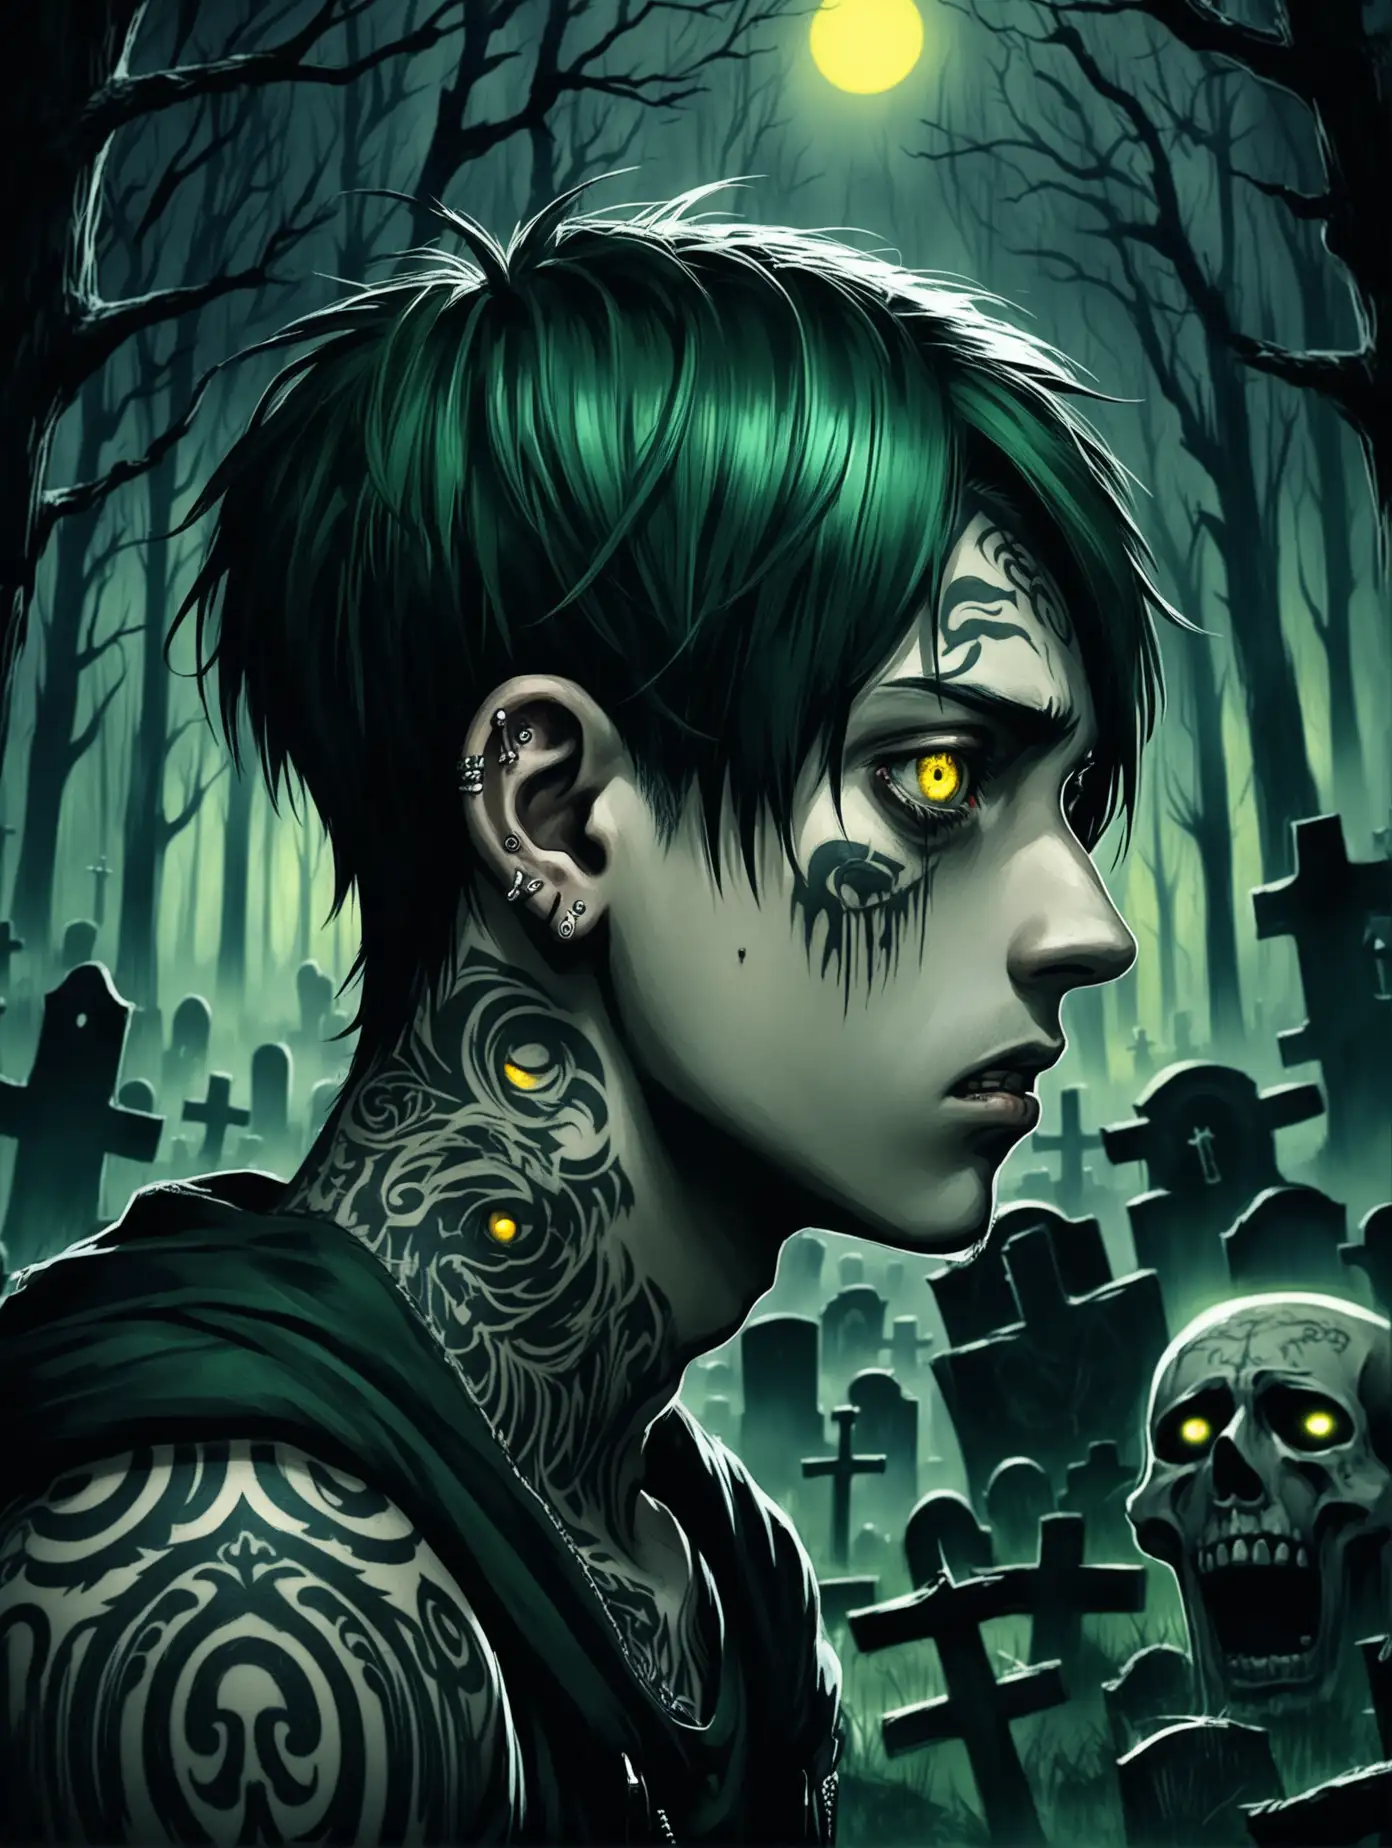 Portrait-of-a-Boy-with-Dark-Green-Hair-and-Tattoos-in-a-Night-Forest-Graveyard